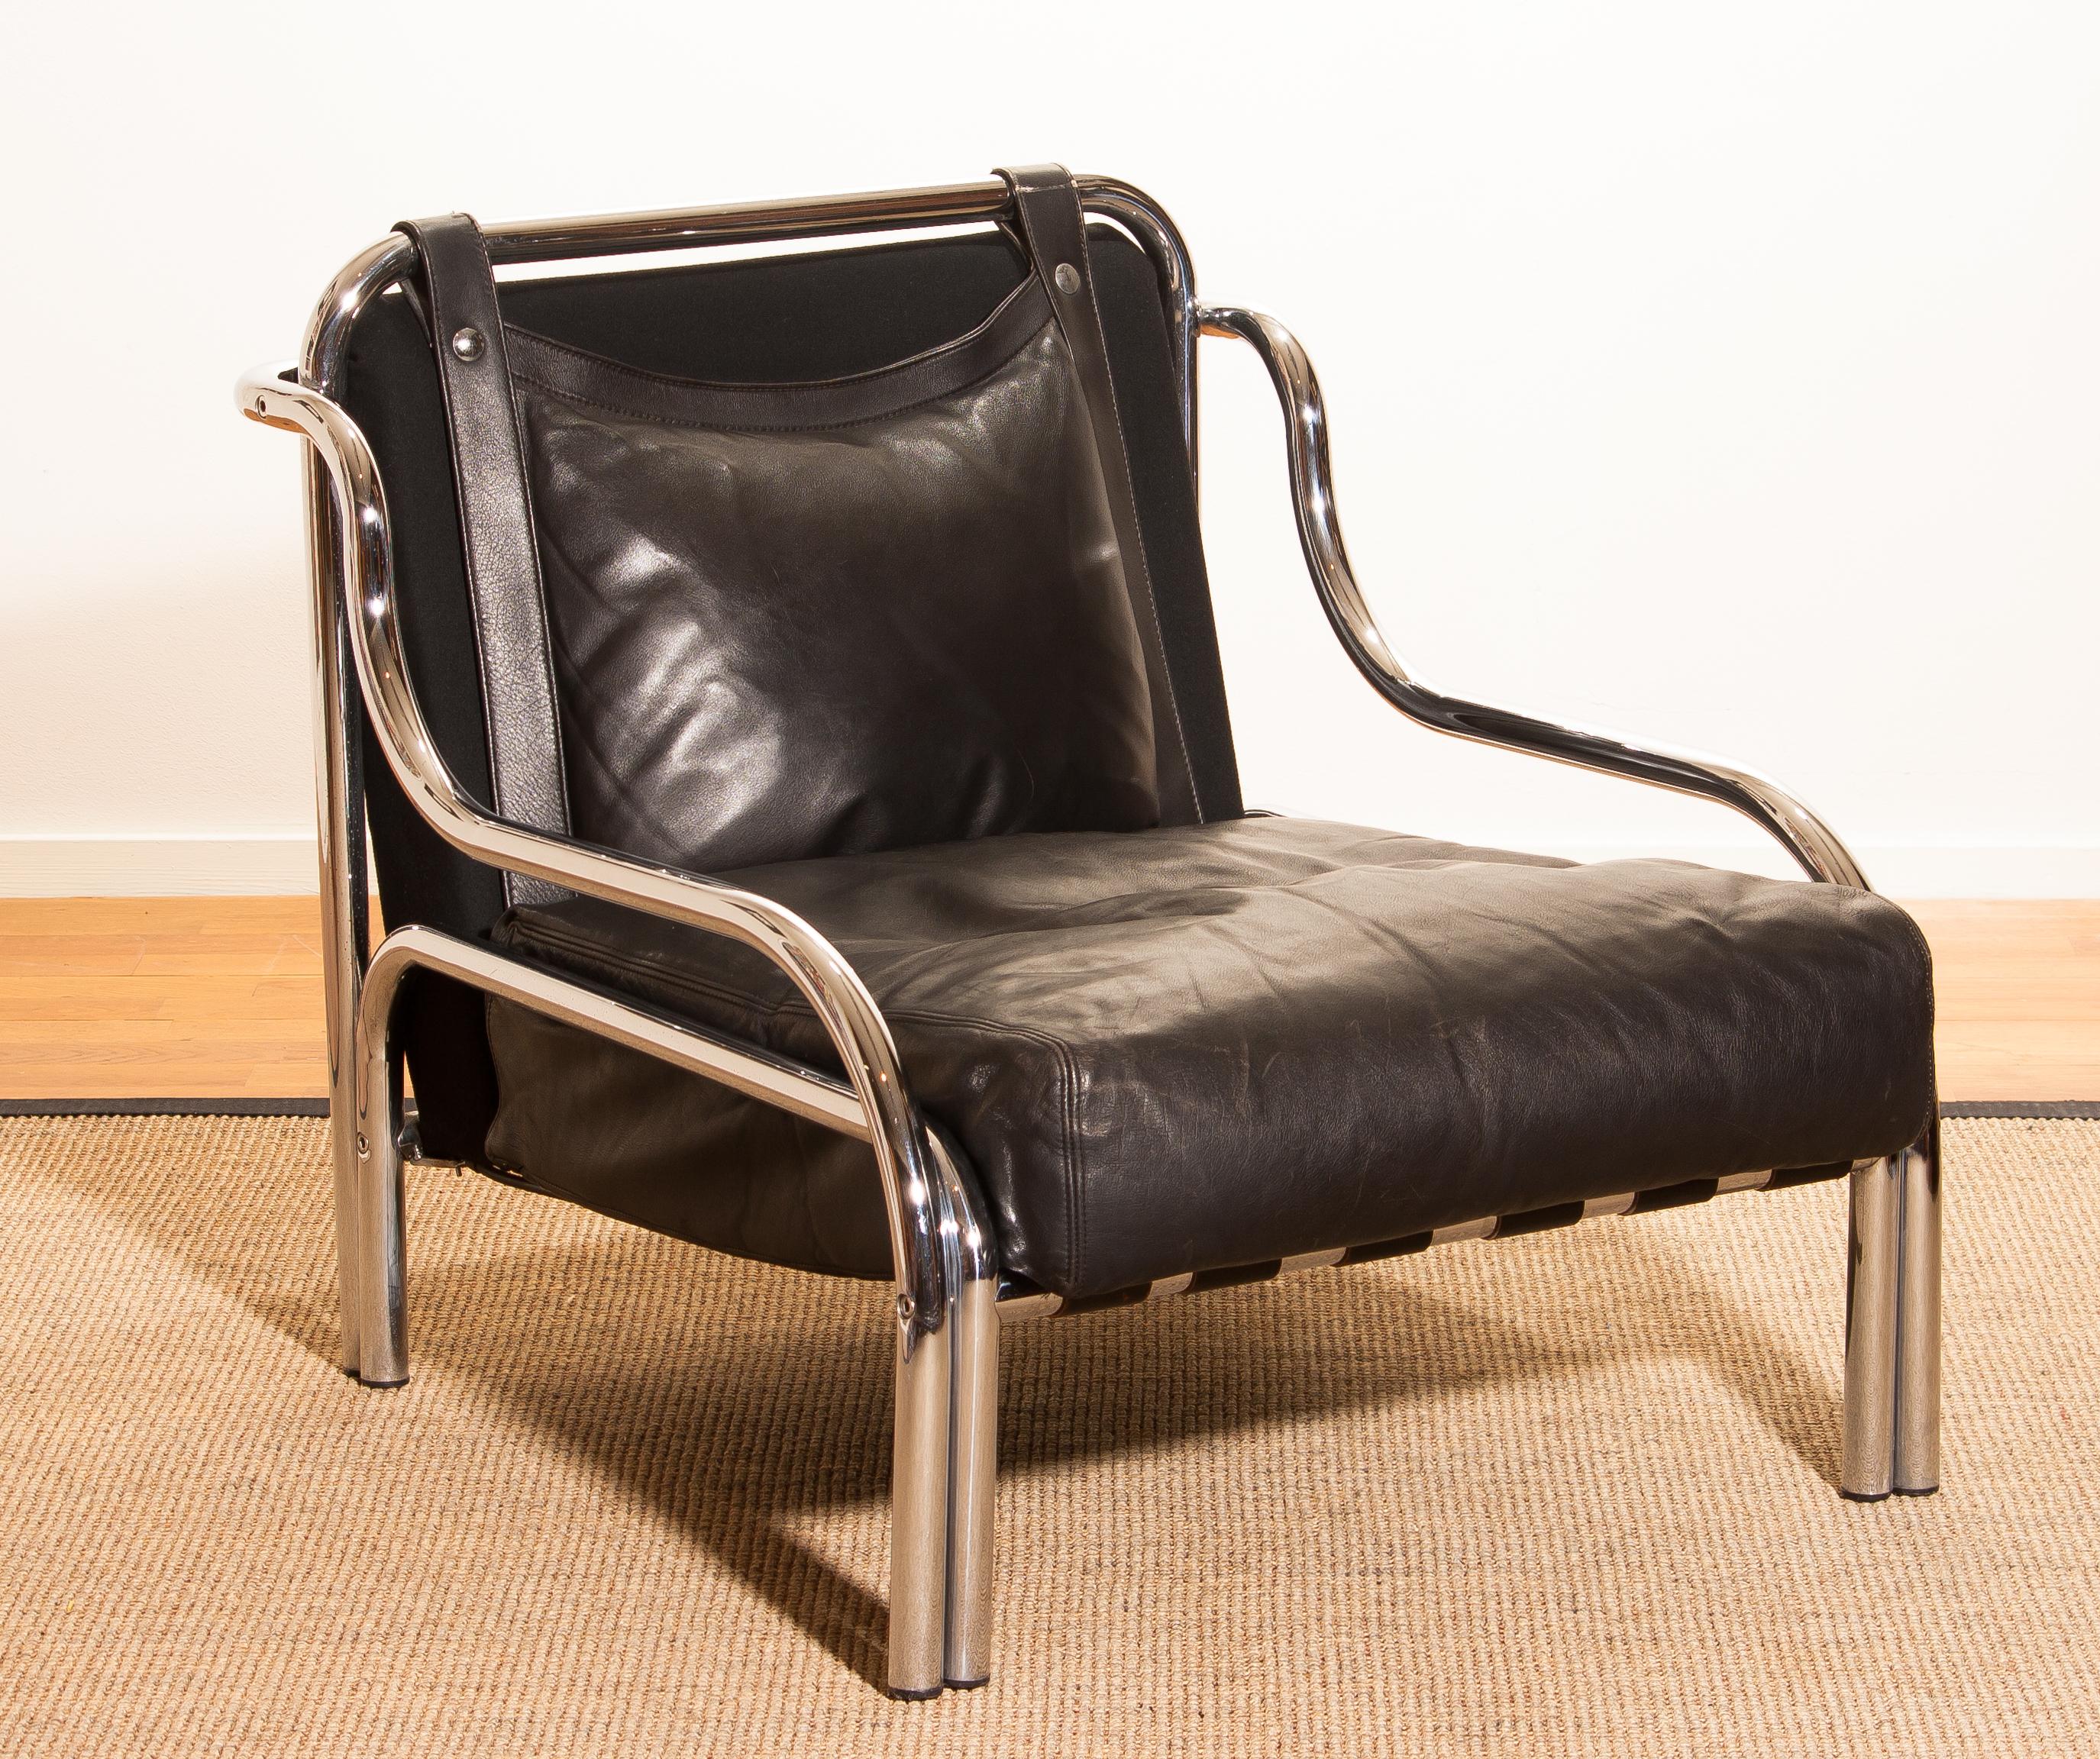 Wonderful lounge chair designed by Gae Aulenti for Poltronova, Italy.
This beautiful chair is made of a black leather seating on a chromed frame.
It is in excellent condition.
Period 1960s
Dimensions: H. 73 cm, W. 71 cm, D. 80 cm, SH. 30 cm.
 